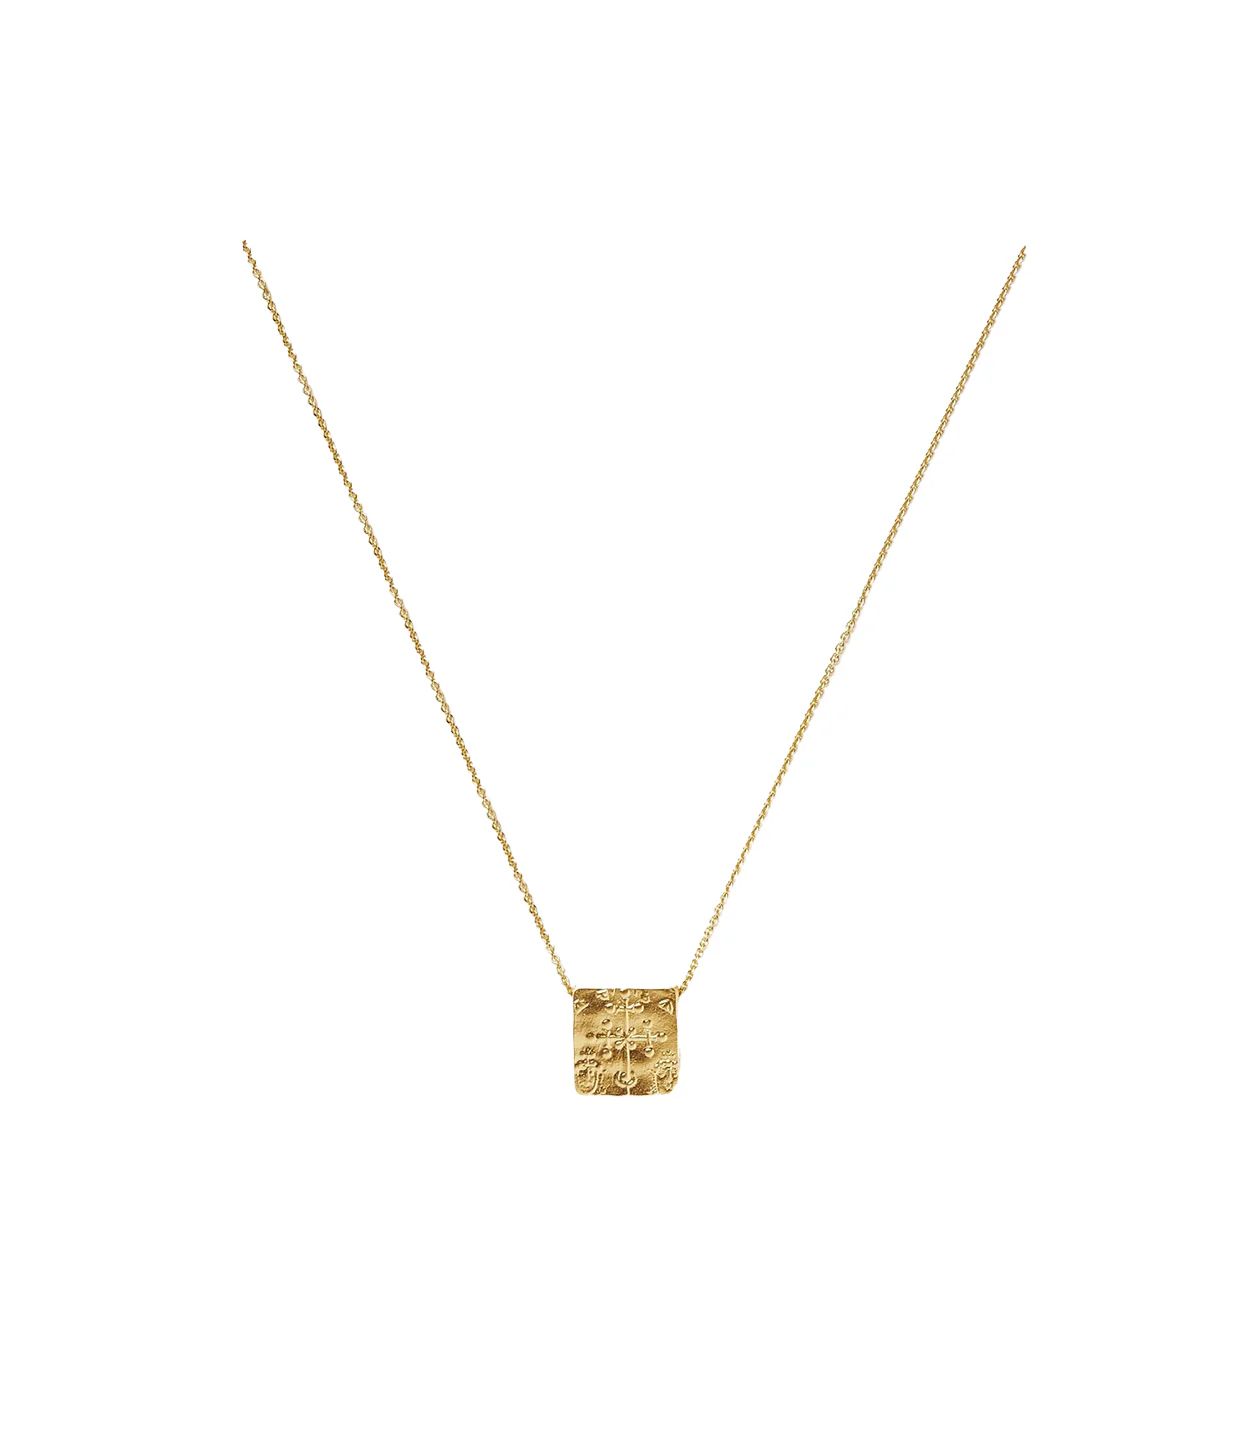 Lucy Williams X Missoma Square Coin Pendant Necklace in Gold | Mode Sportif